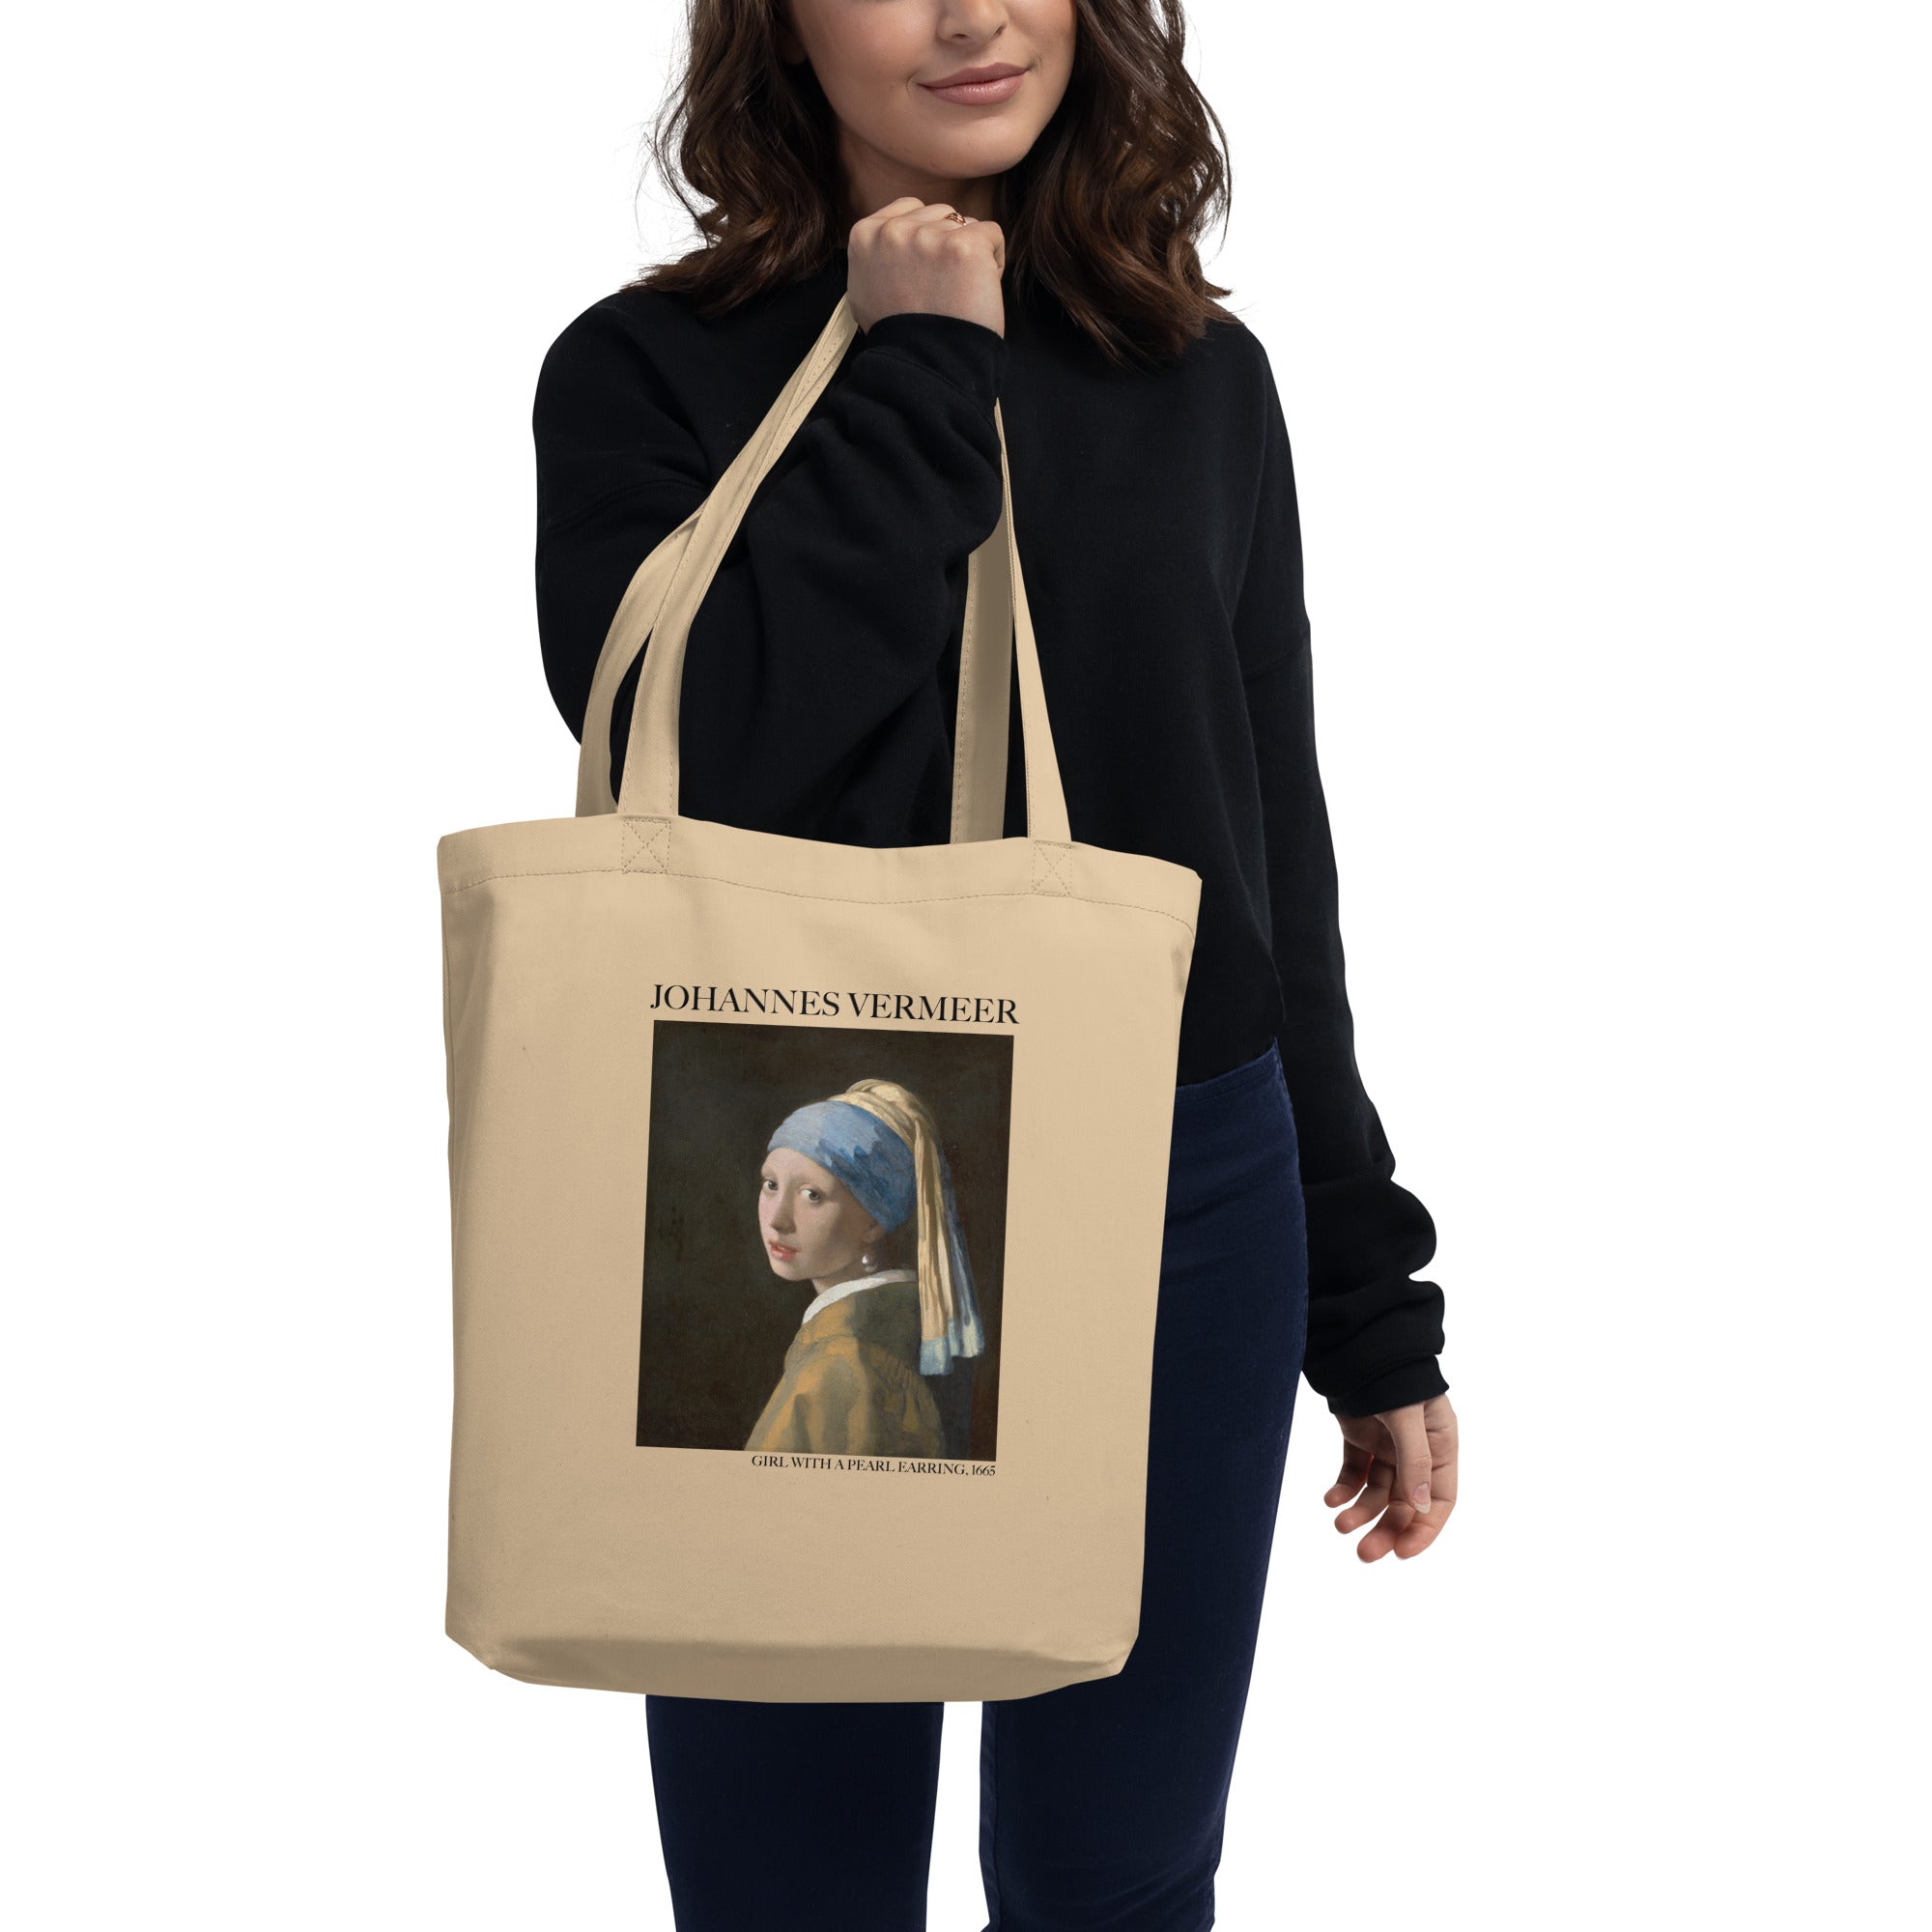 Johannes Vermeer 'Girl with a Pearl Earring' Famous Painting Totebag | Eco Friendly Art Tote Bag